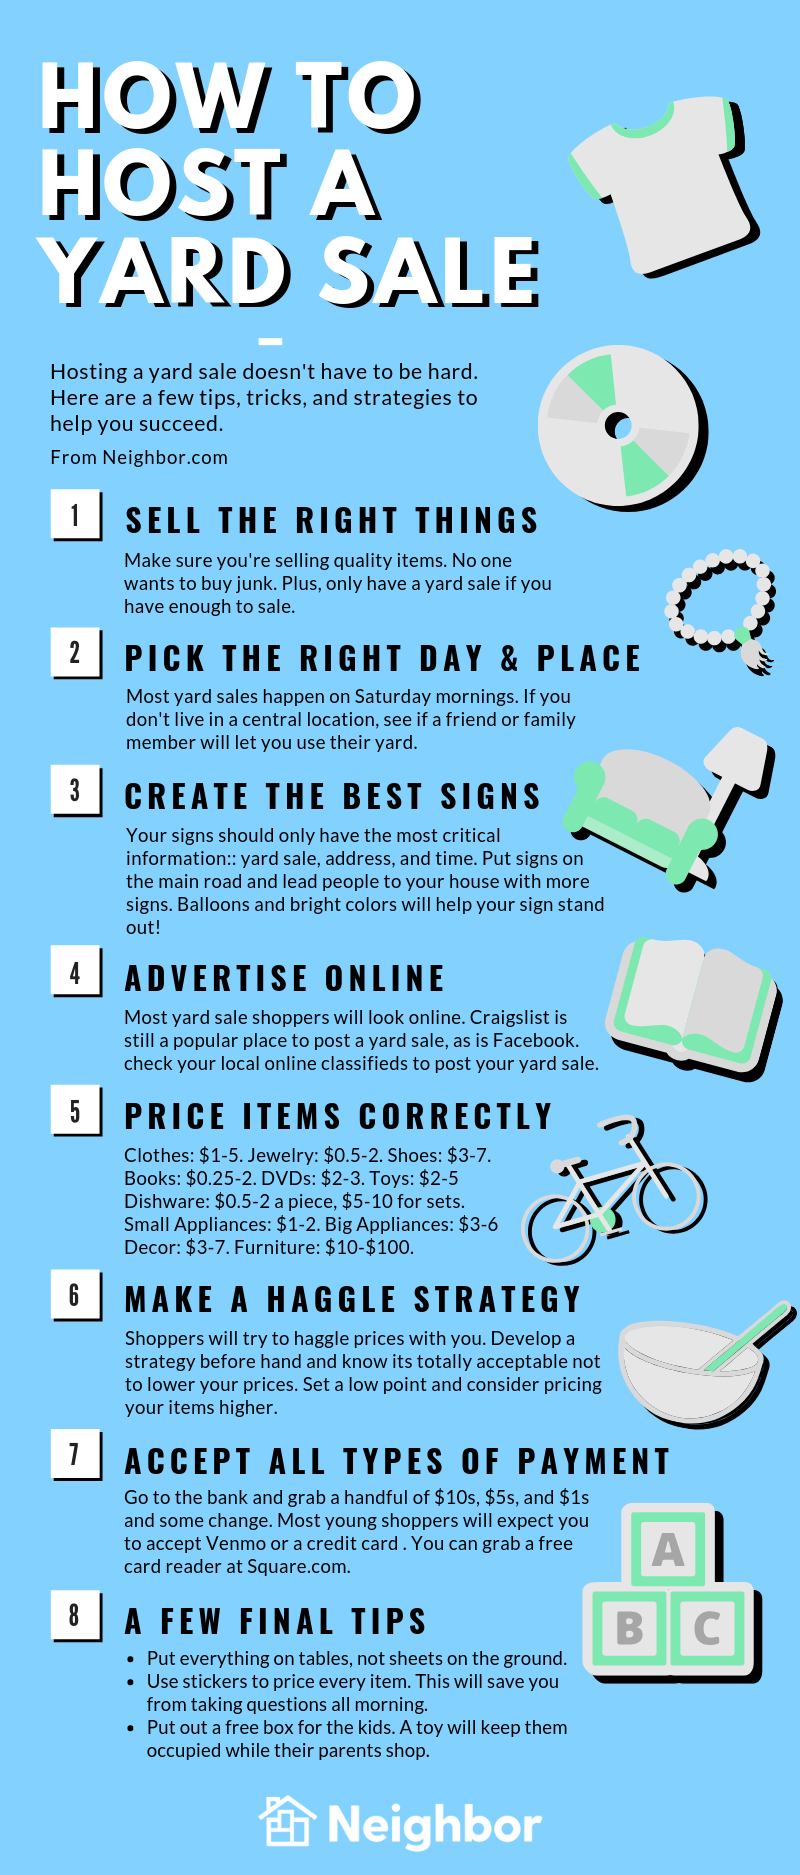 Yard Sales: How to Host, Pricing, and Tips [Checklist] - Neighbor Blog